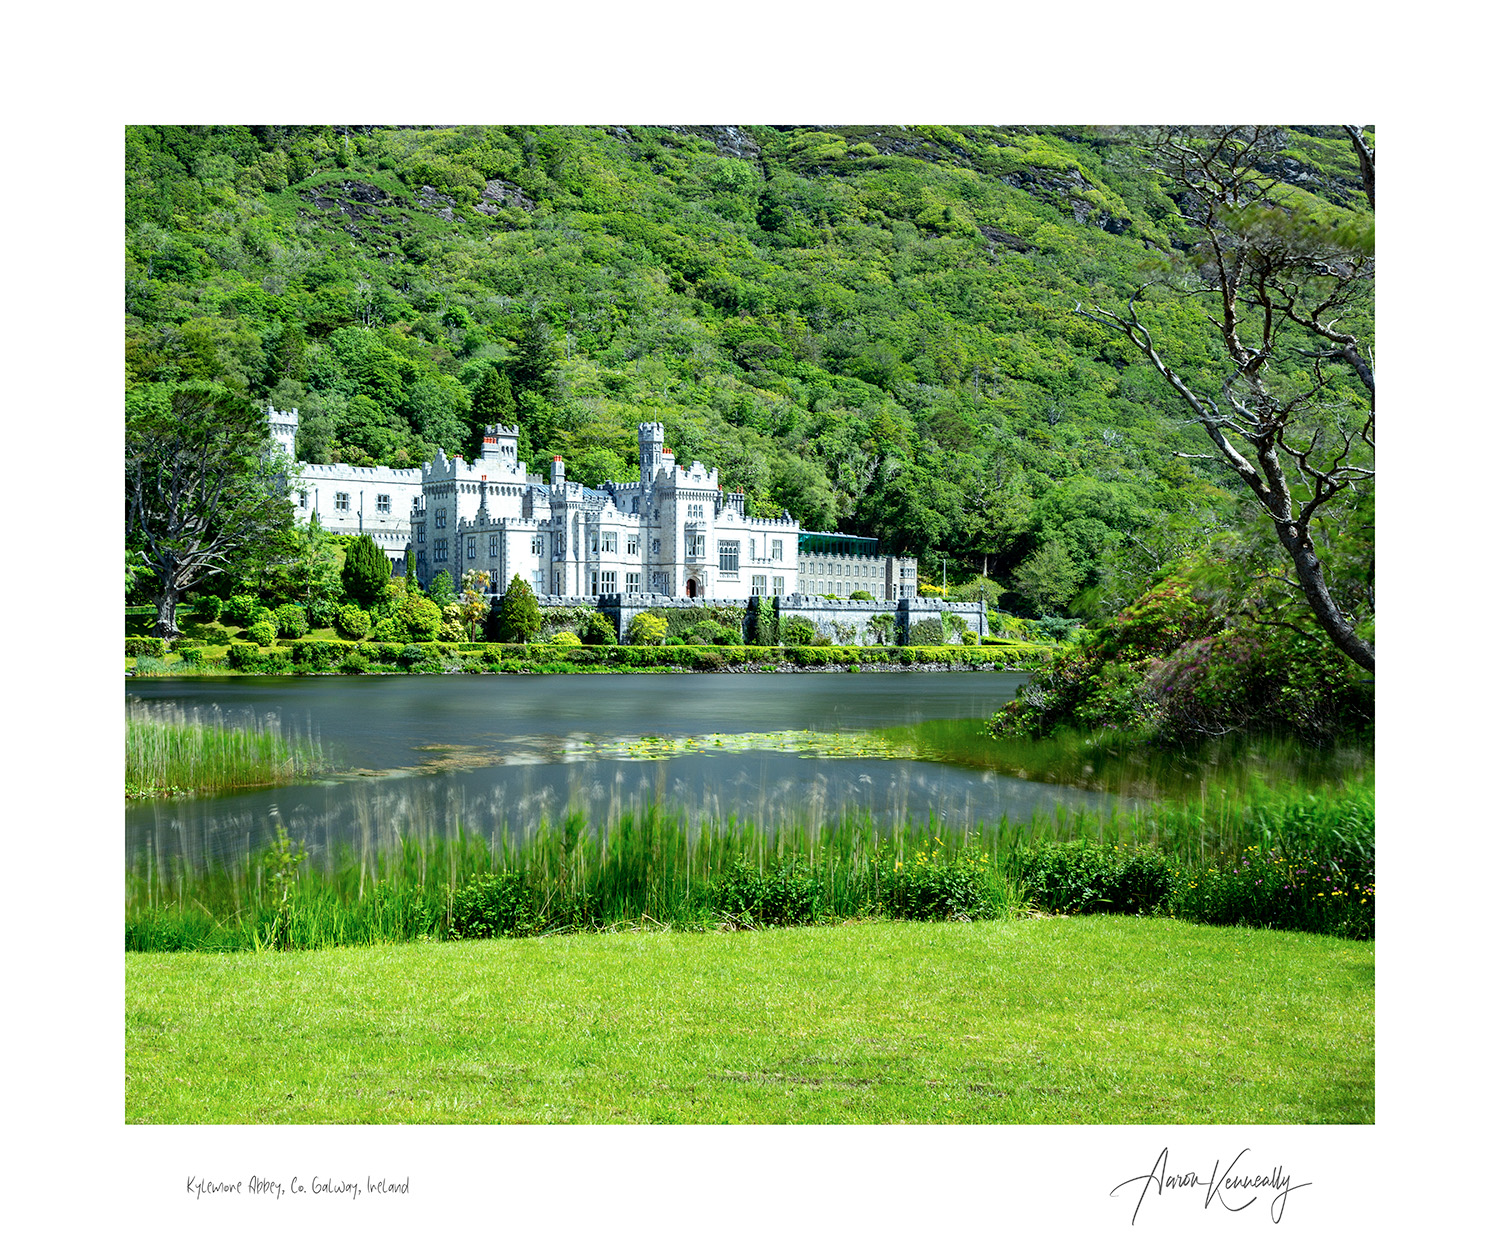 Kylemore Abbey, Co. Galway, Ireland